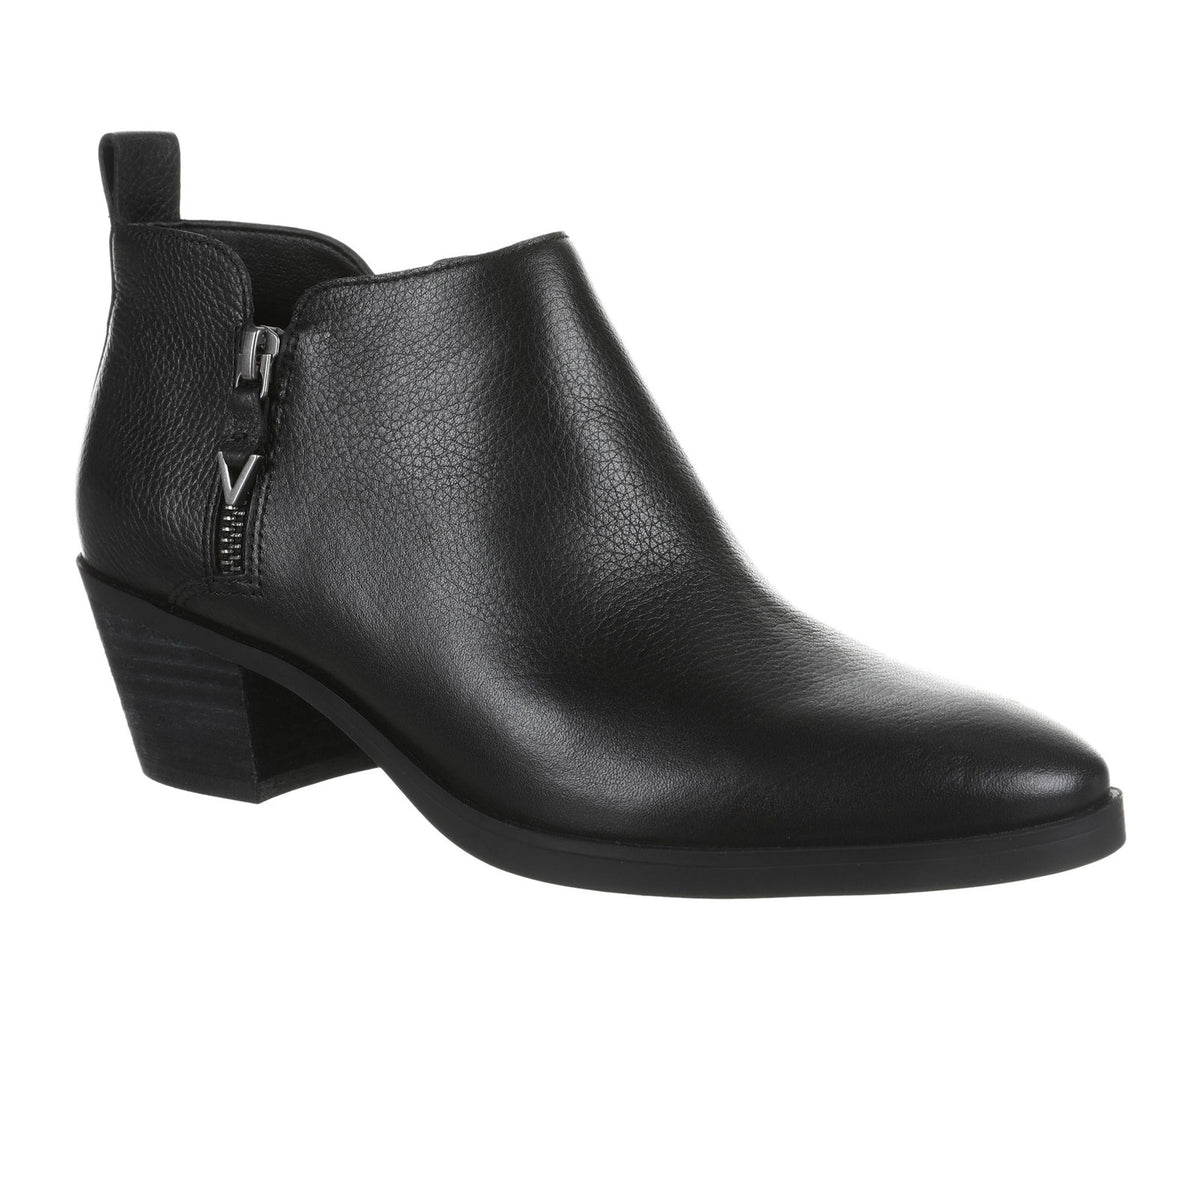 Vionic Cecily Ankle Boot (Women) - Black Waterproof Tumbled Leather ...